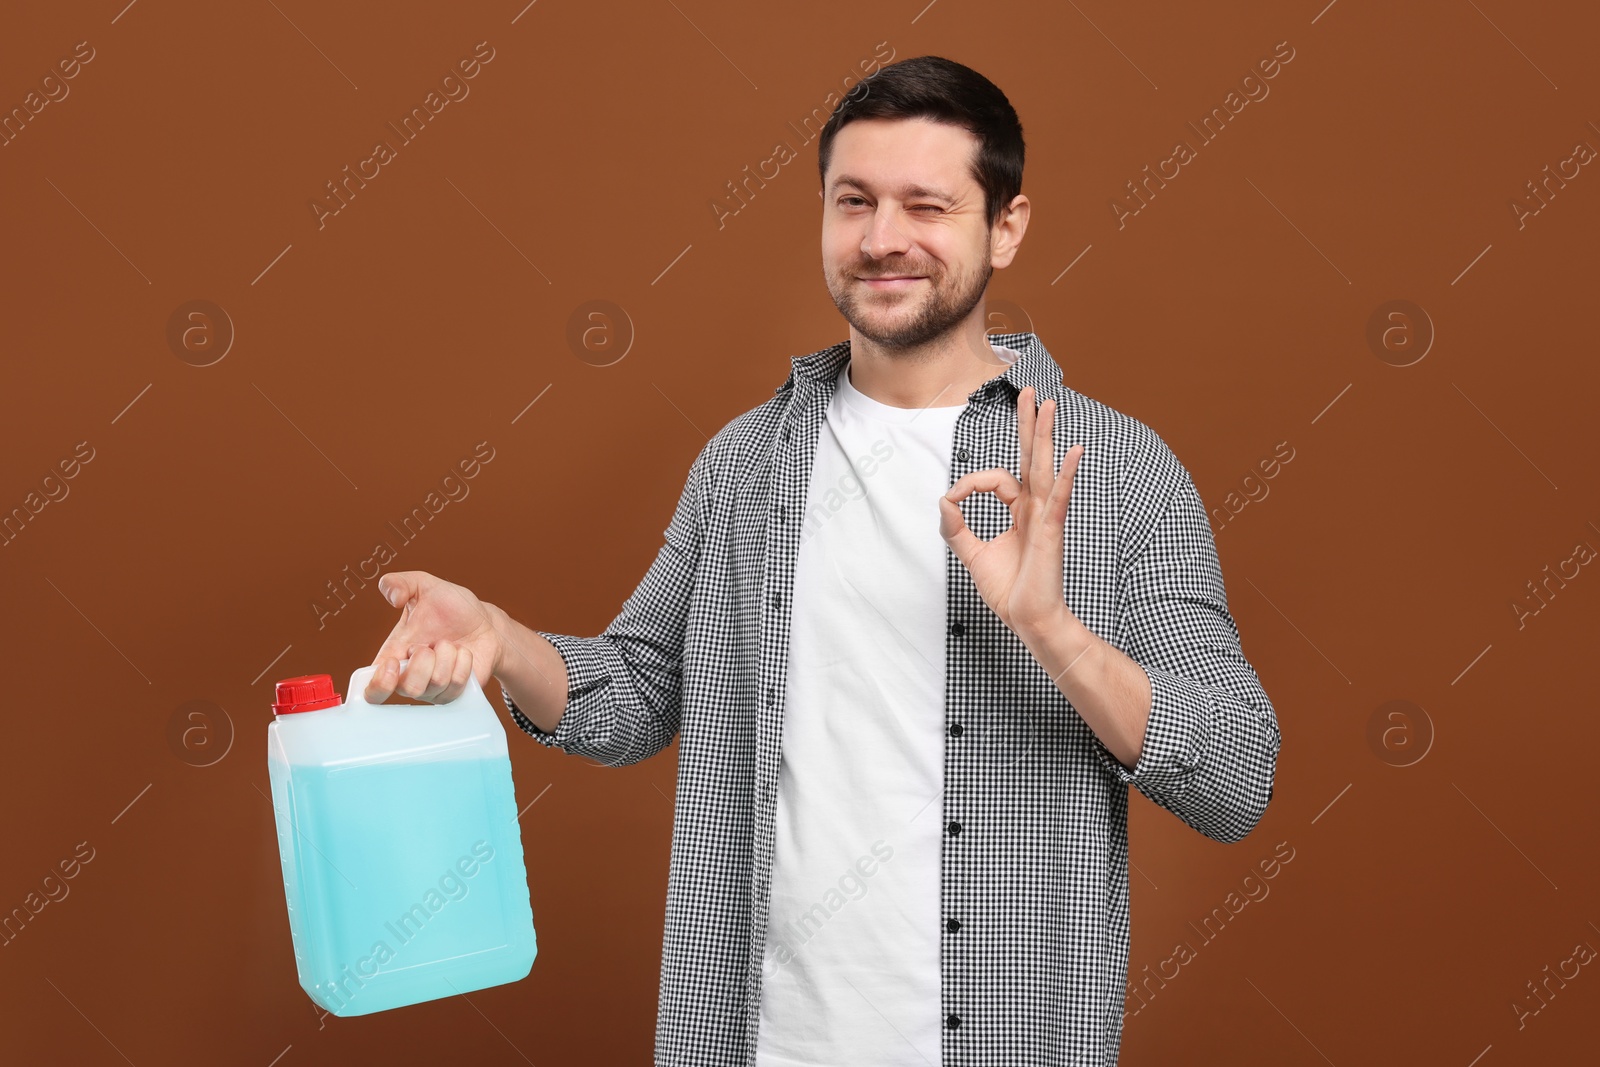 Photo of Man holding canister with blue liquid and showing OK gesture on brown background